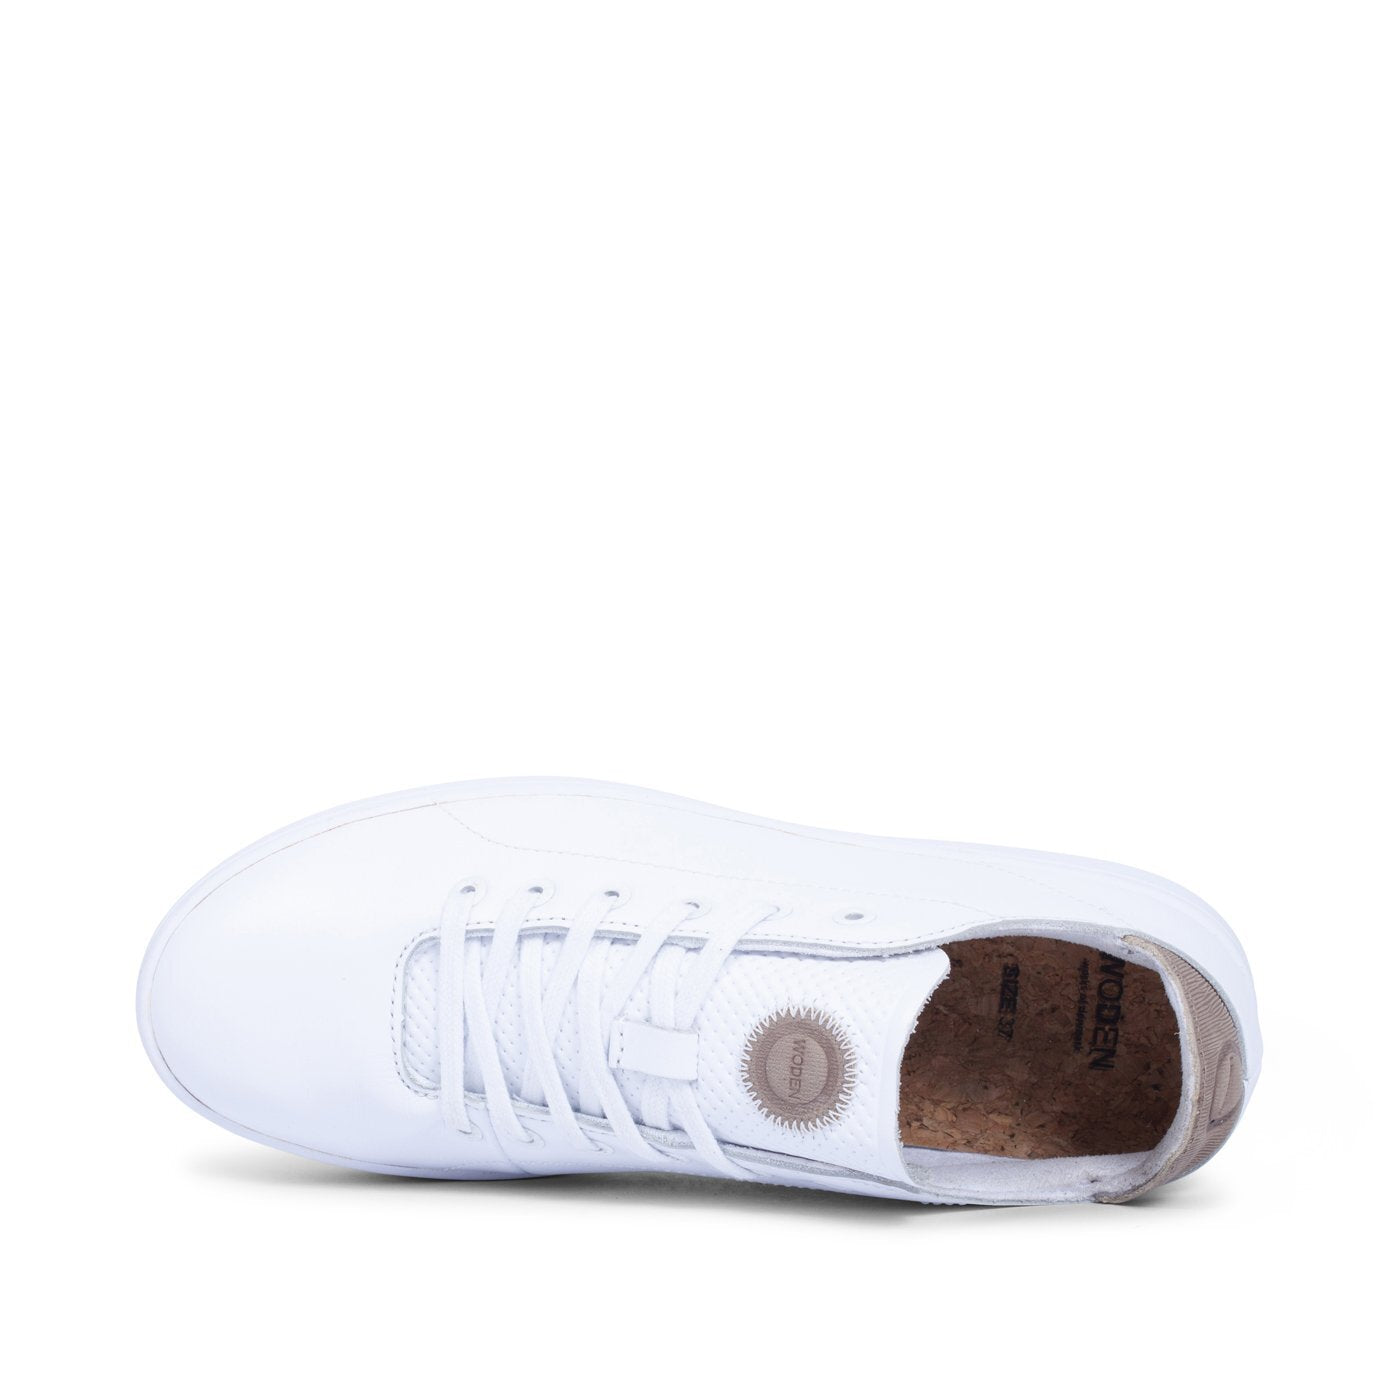 Leather trainer | Woden